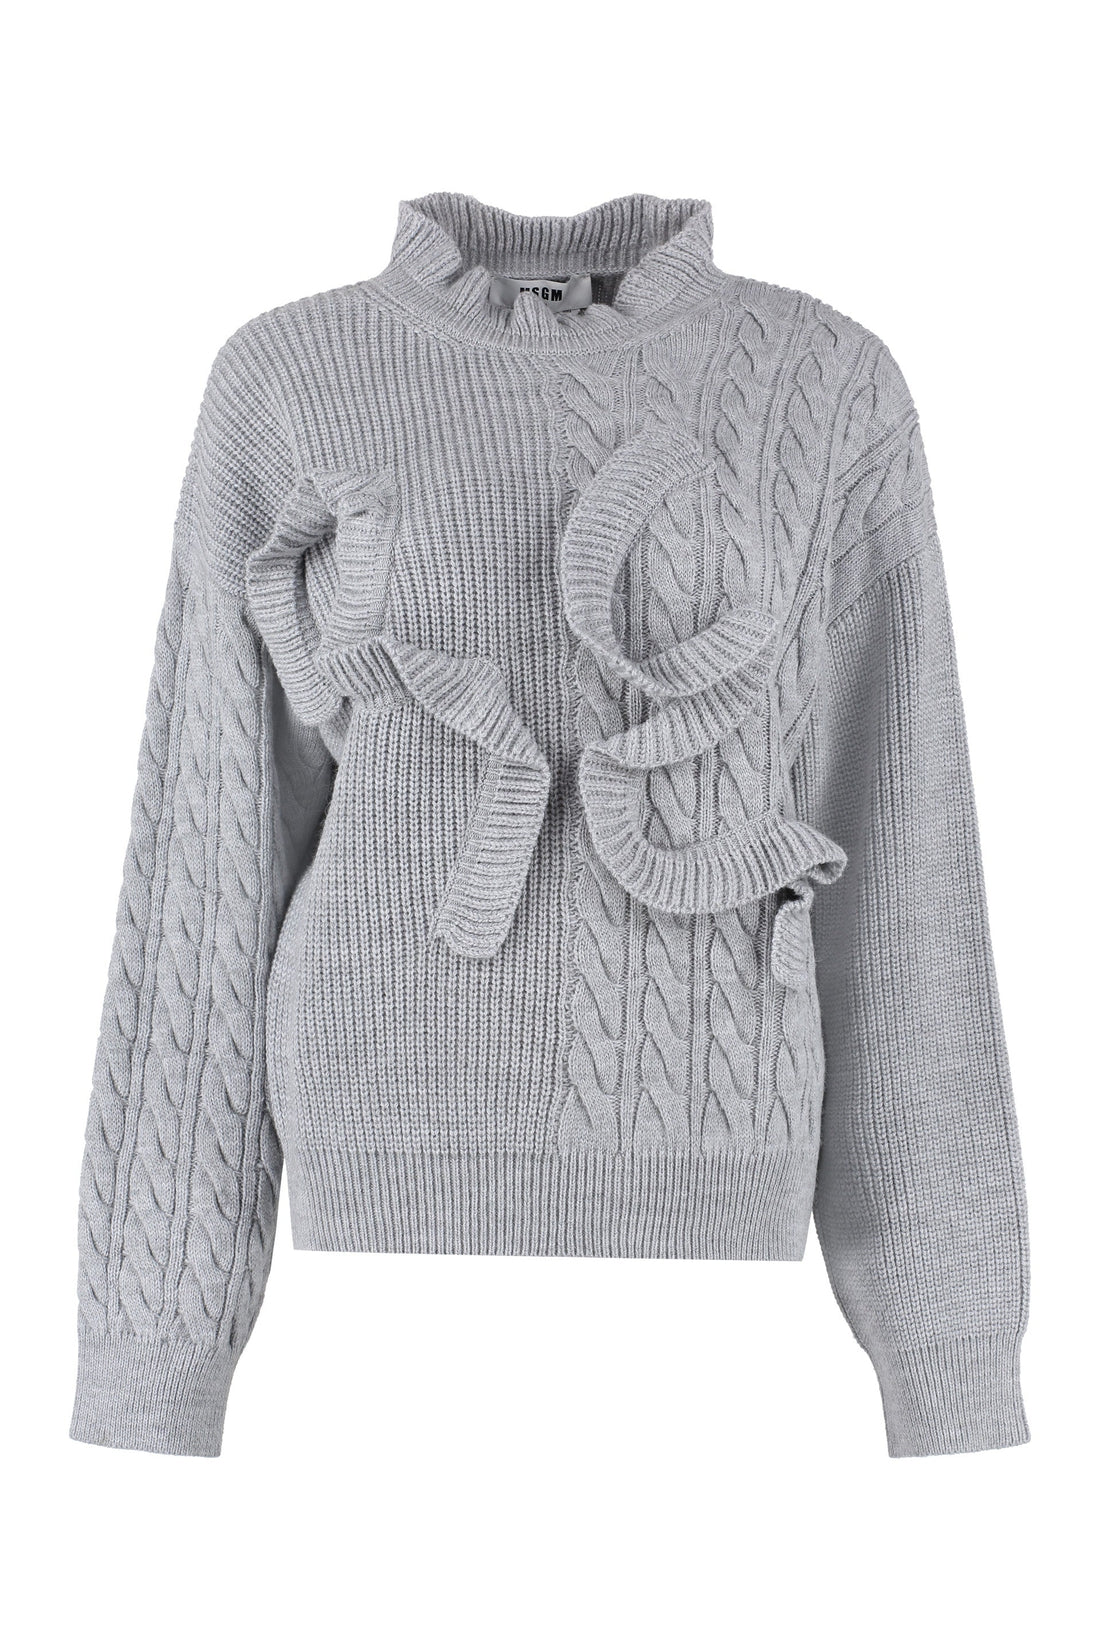 MSGM-OUTLET-SALE-Frilled wool-blend sweater-ARCHIVIST